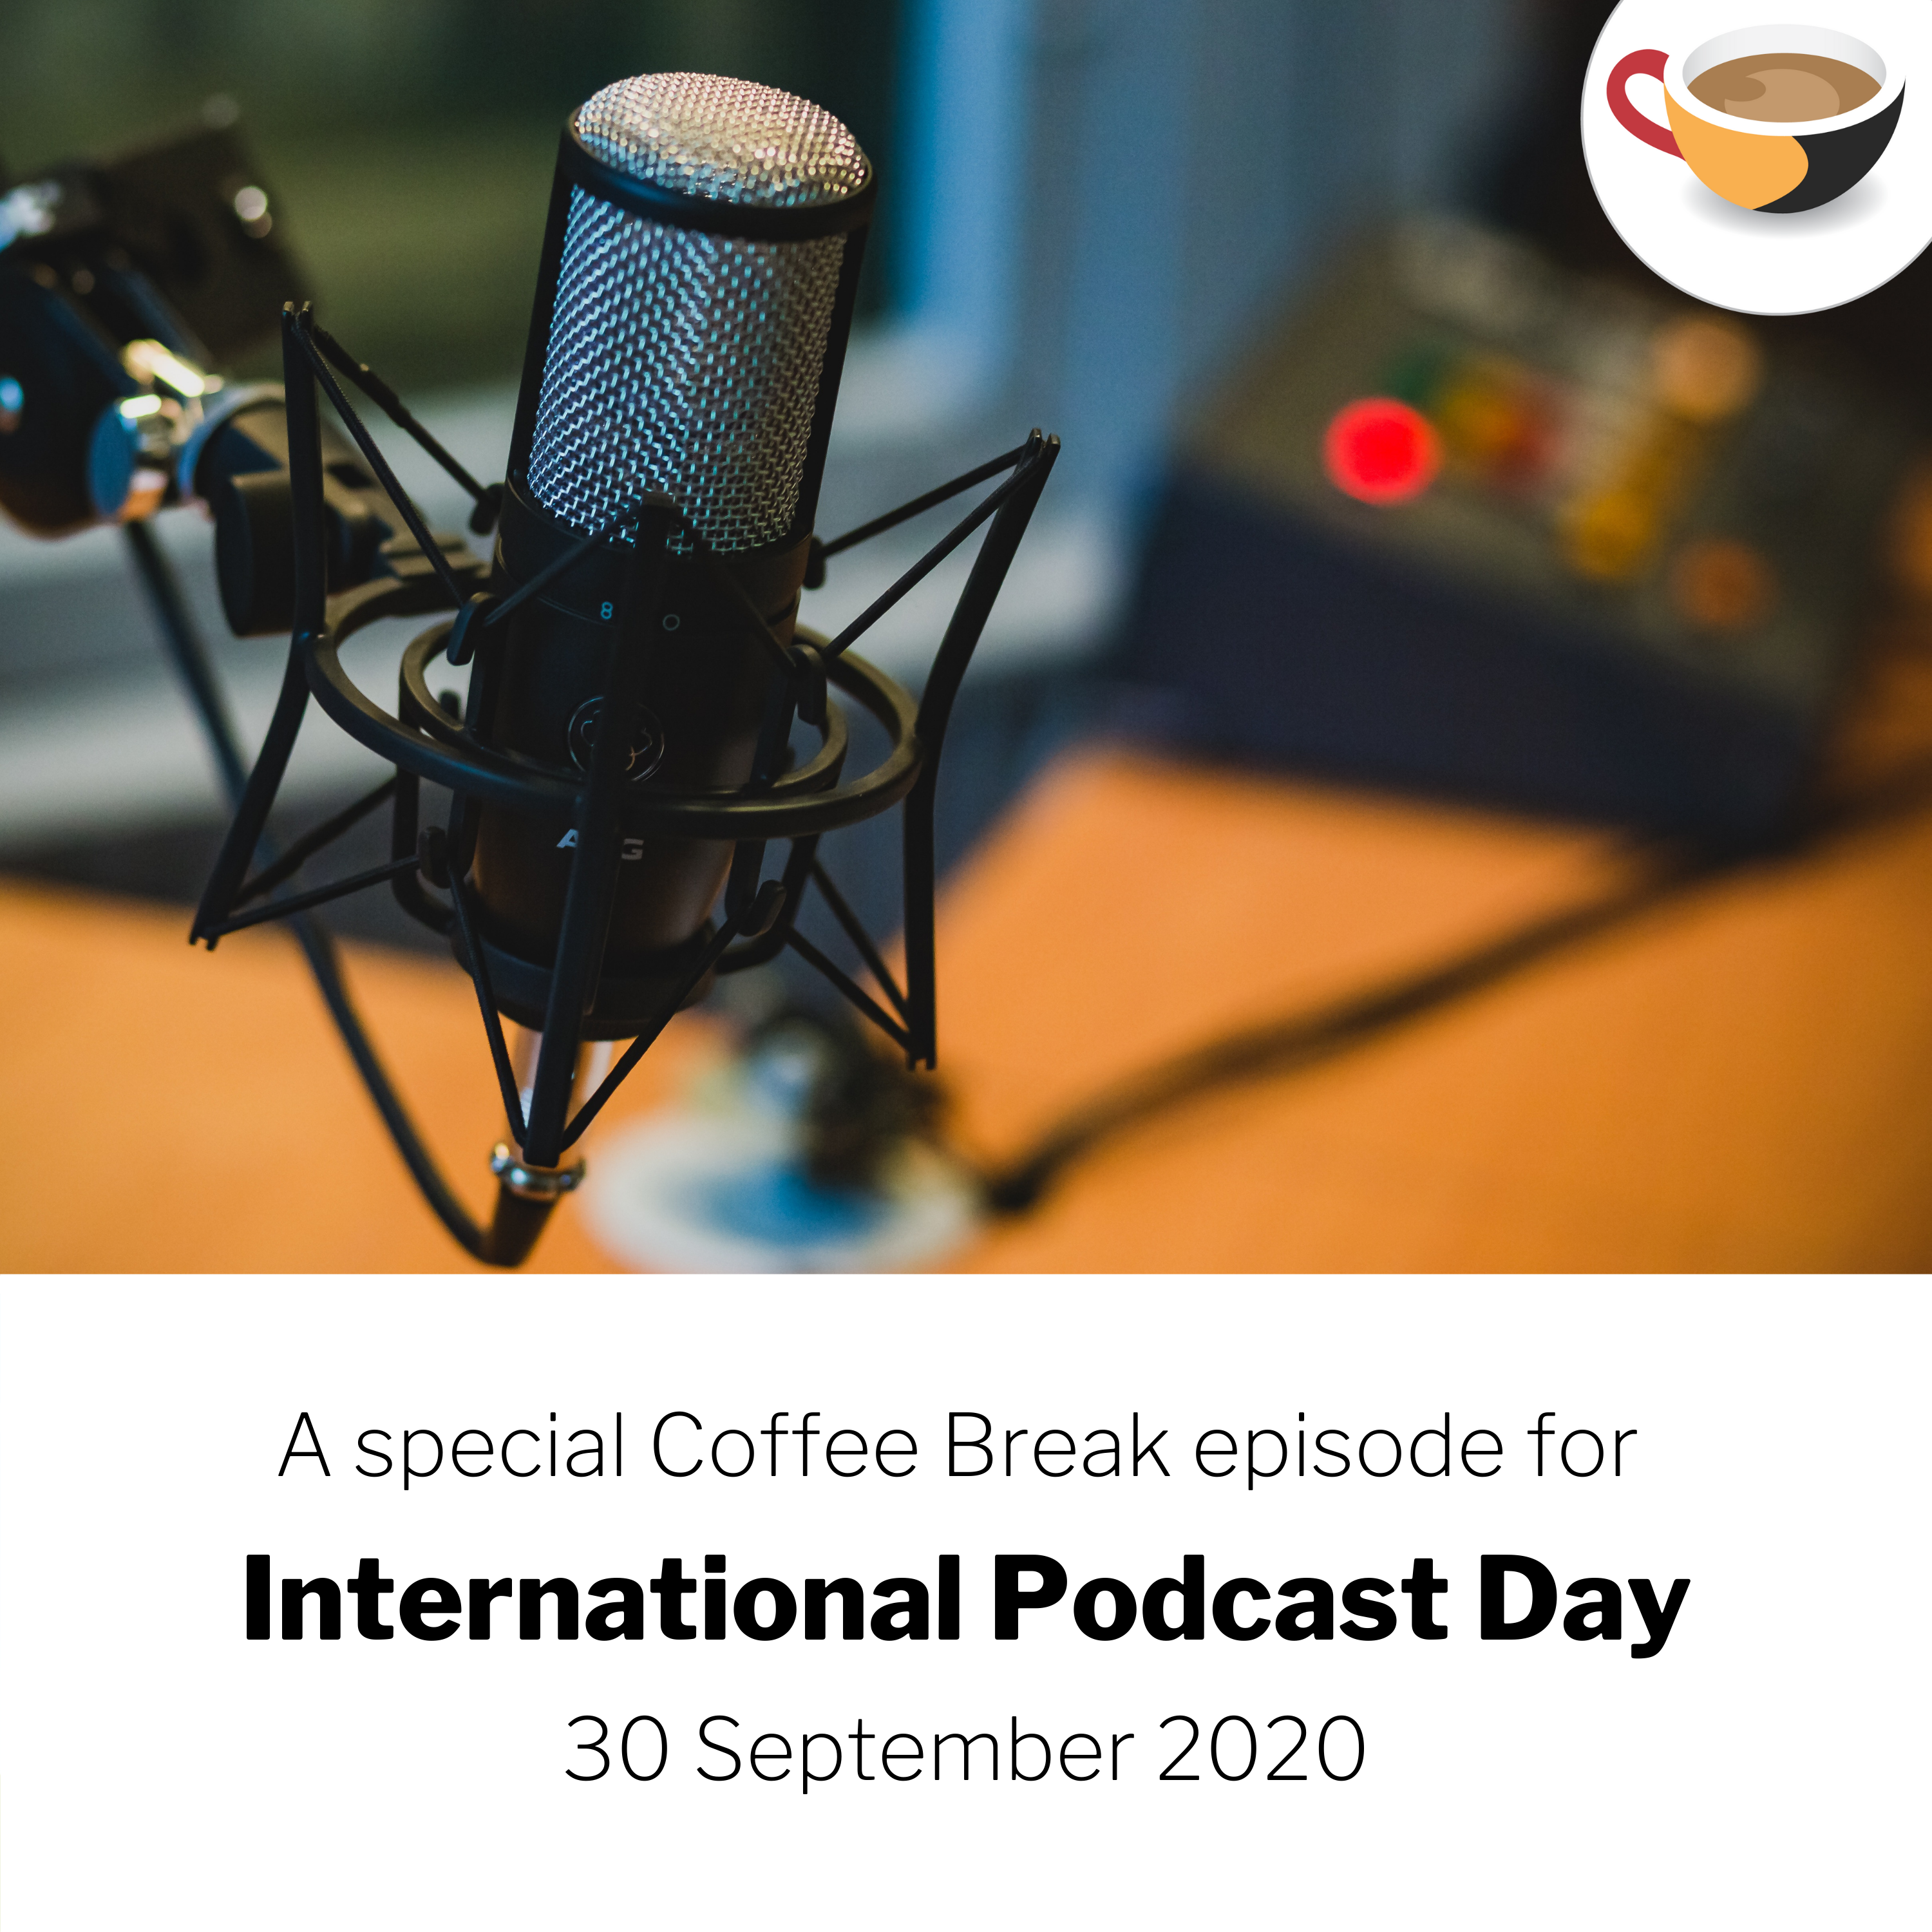 A special thank you from Coffee Break on International Podcast Day